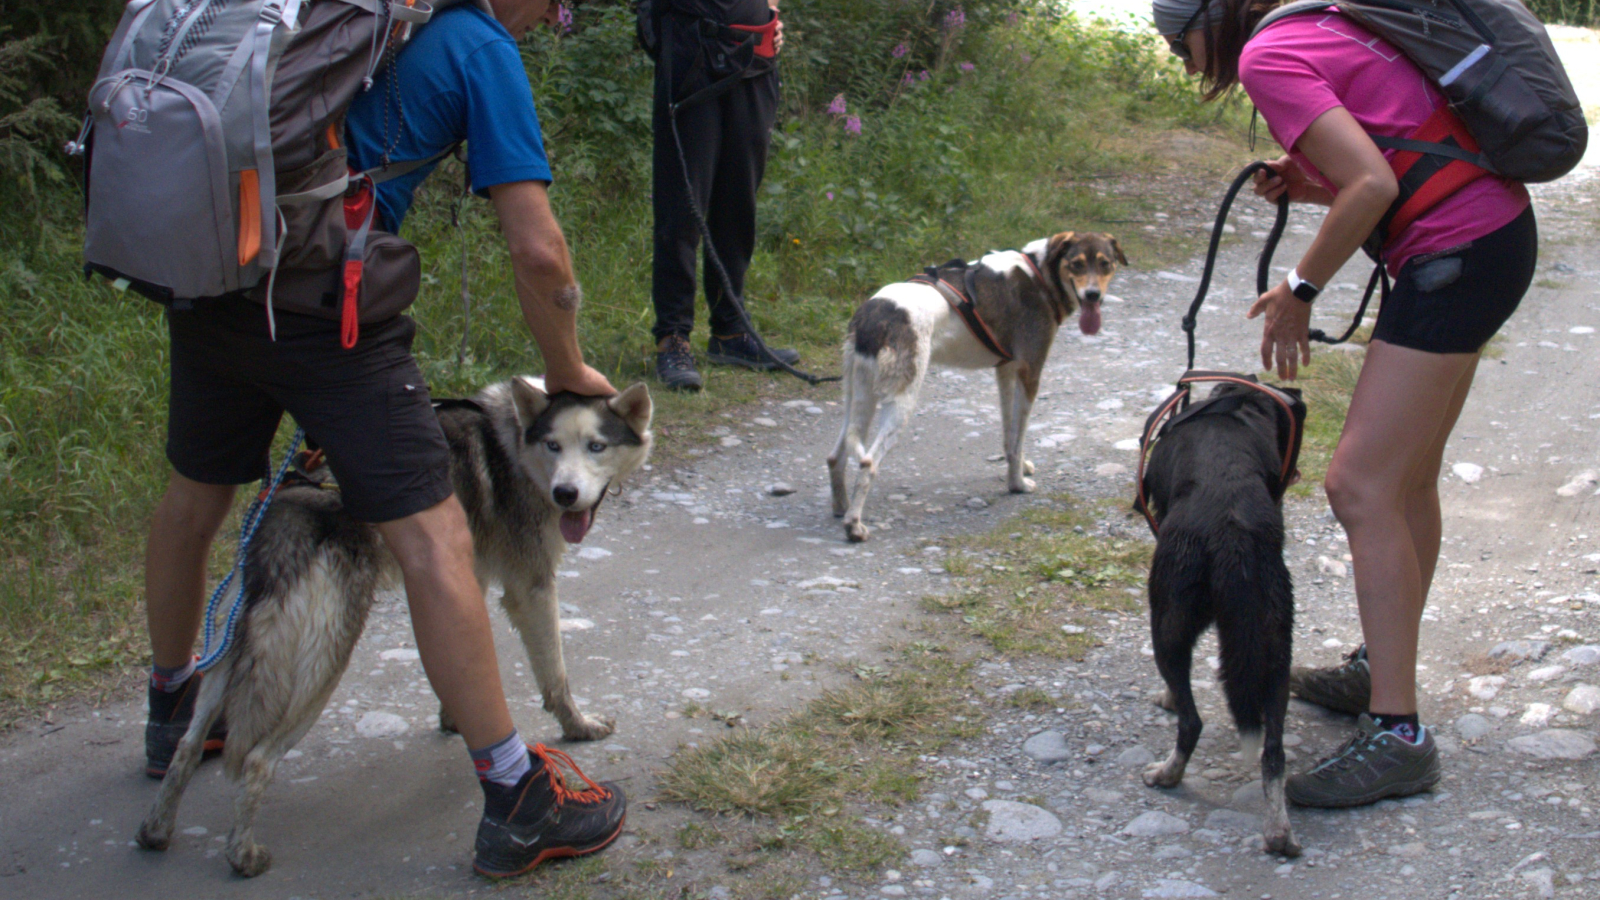 Cani-hike with Husky Adventure in Aussois